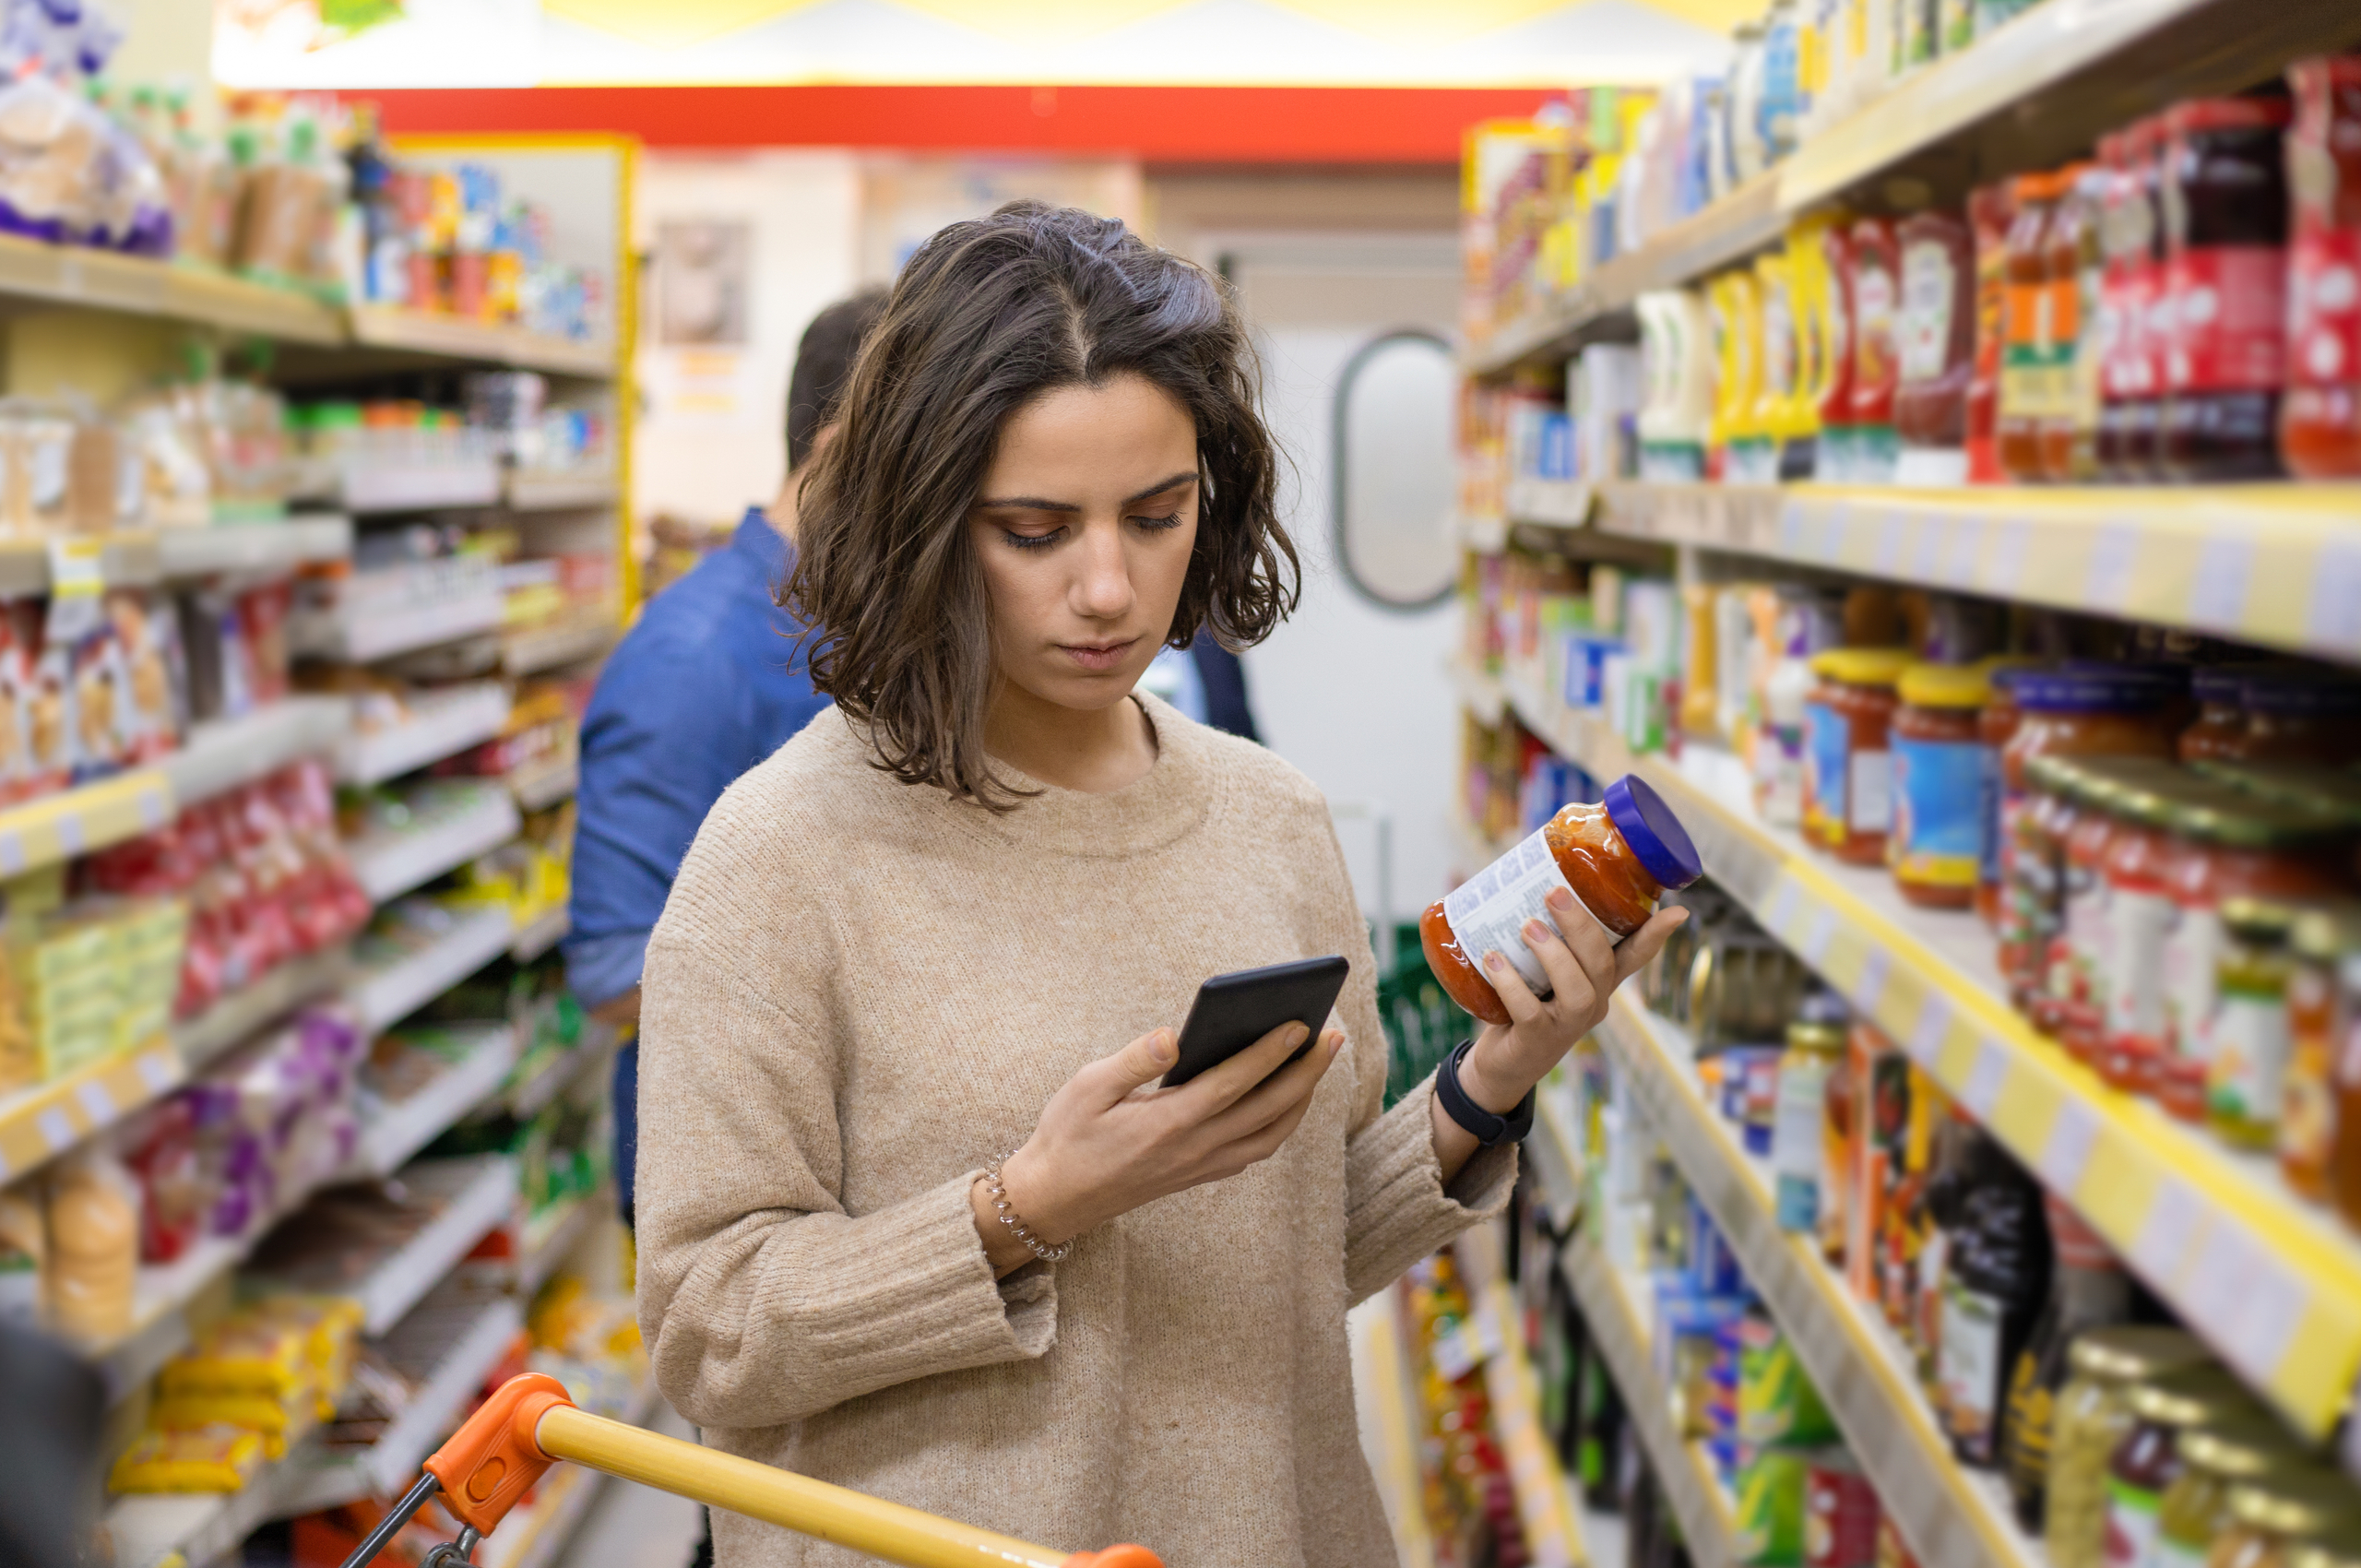 woman looking at a jar in the supermarket while checking her phone